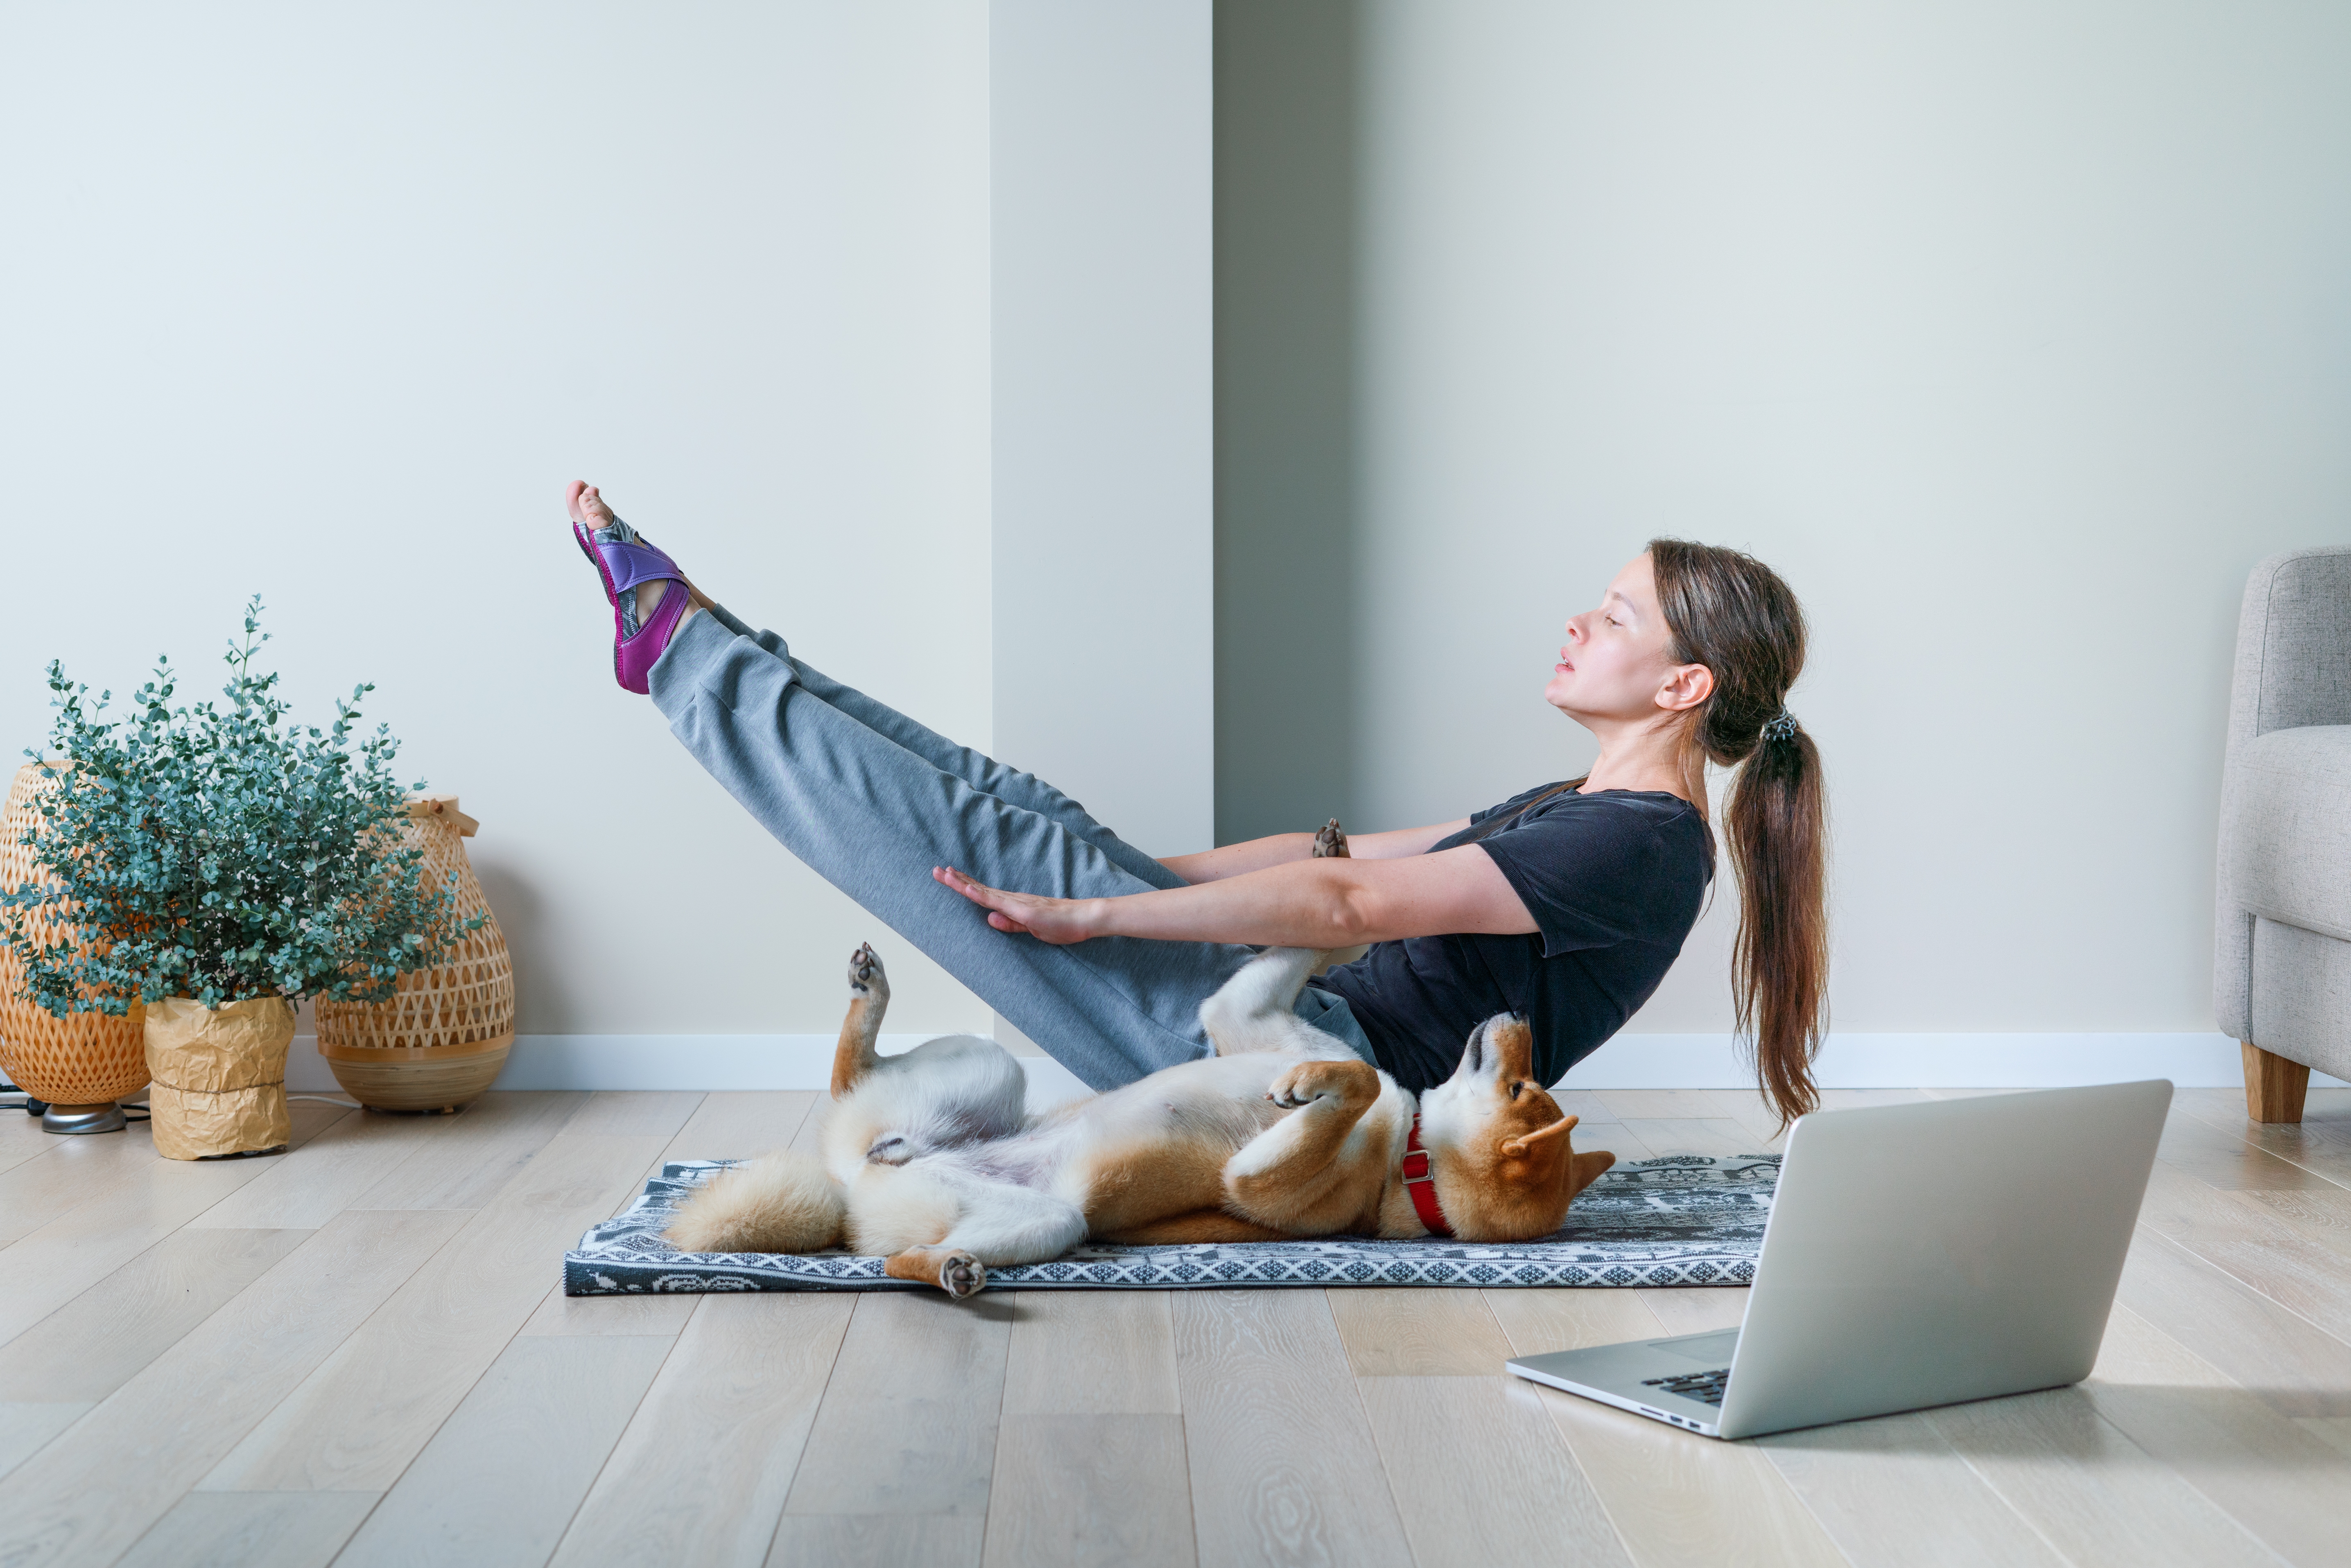 Doga yoga is the practice of yoga as exercise with dogs. Online yoga with domestic dog